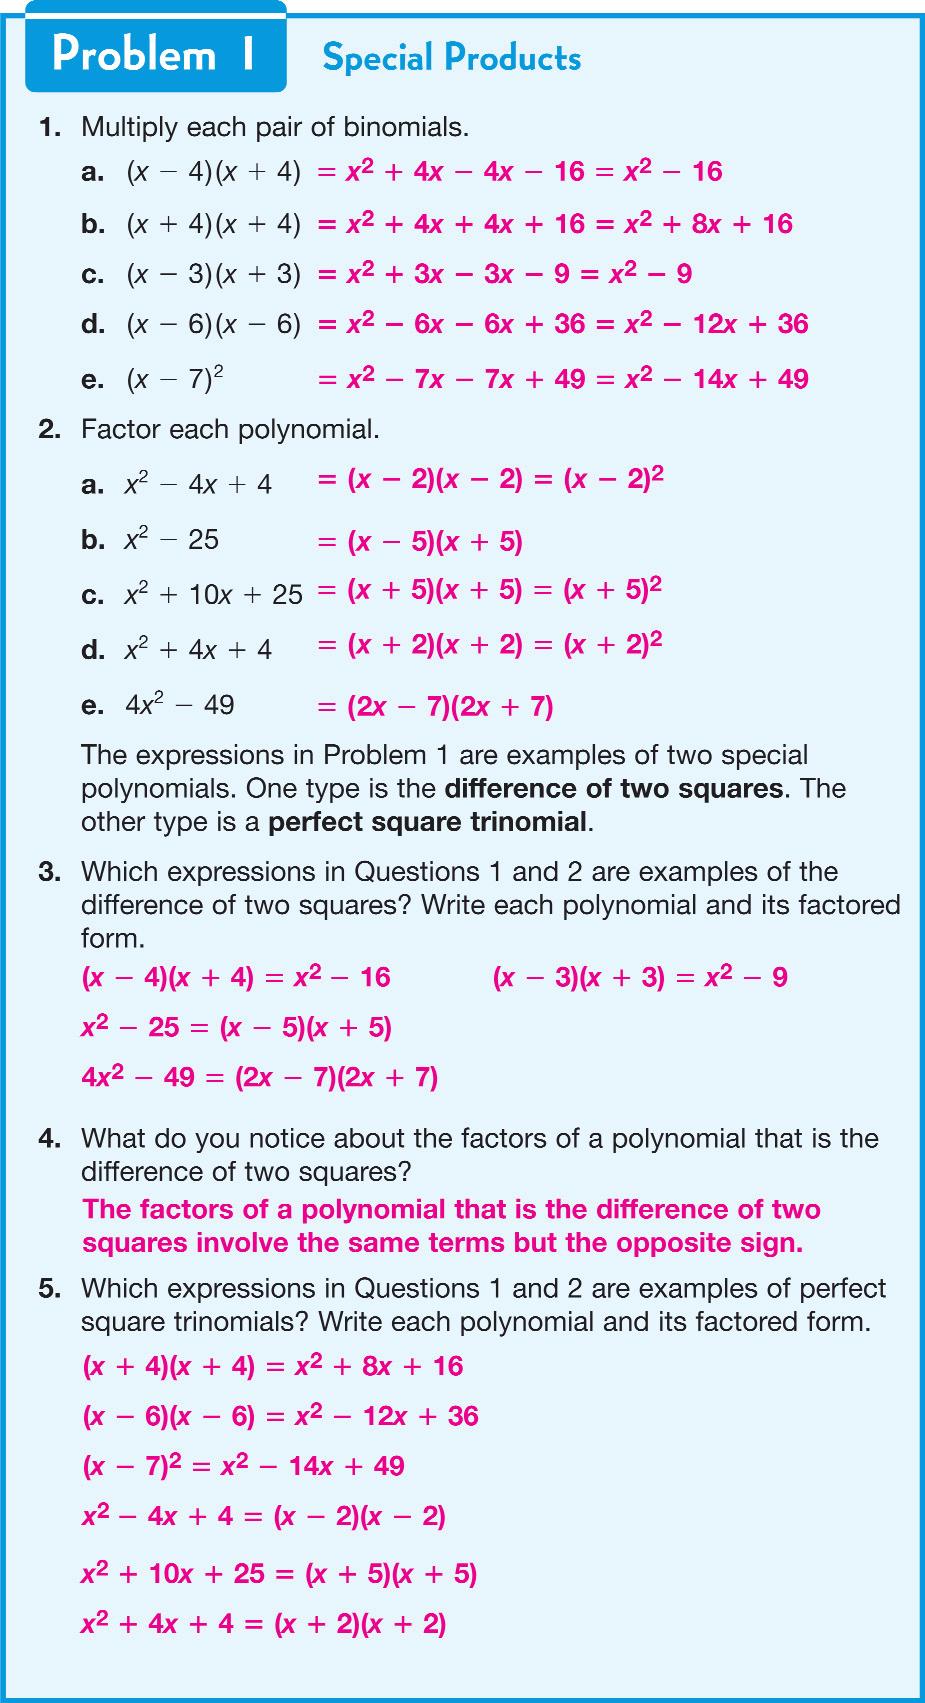 Explore Together Problem 1 Differences of two squares are special polynomials written in the form a 2 b 2 (a b)(a b), where a and b are any real numbers.